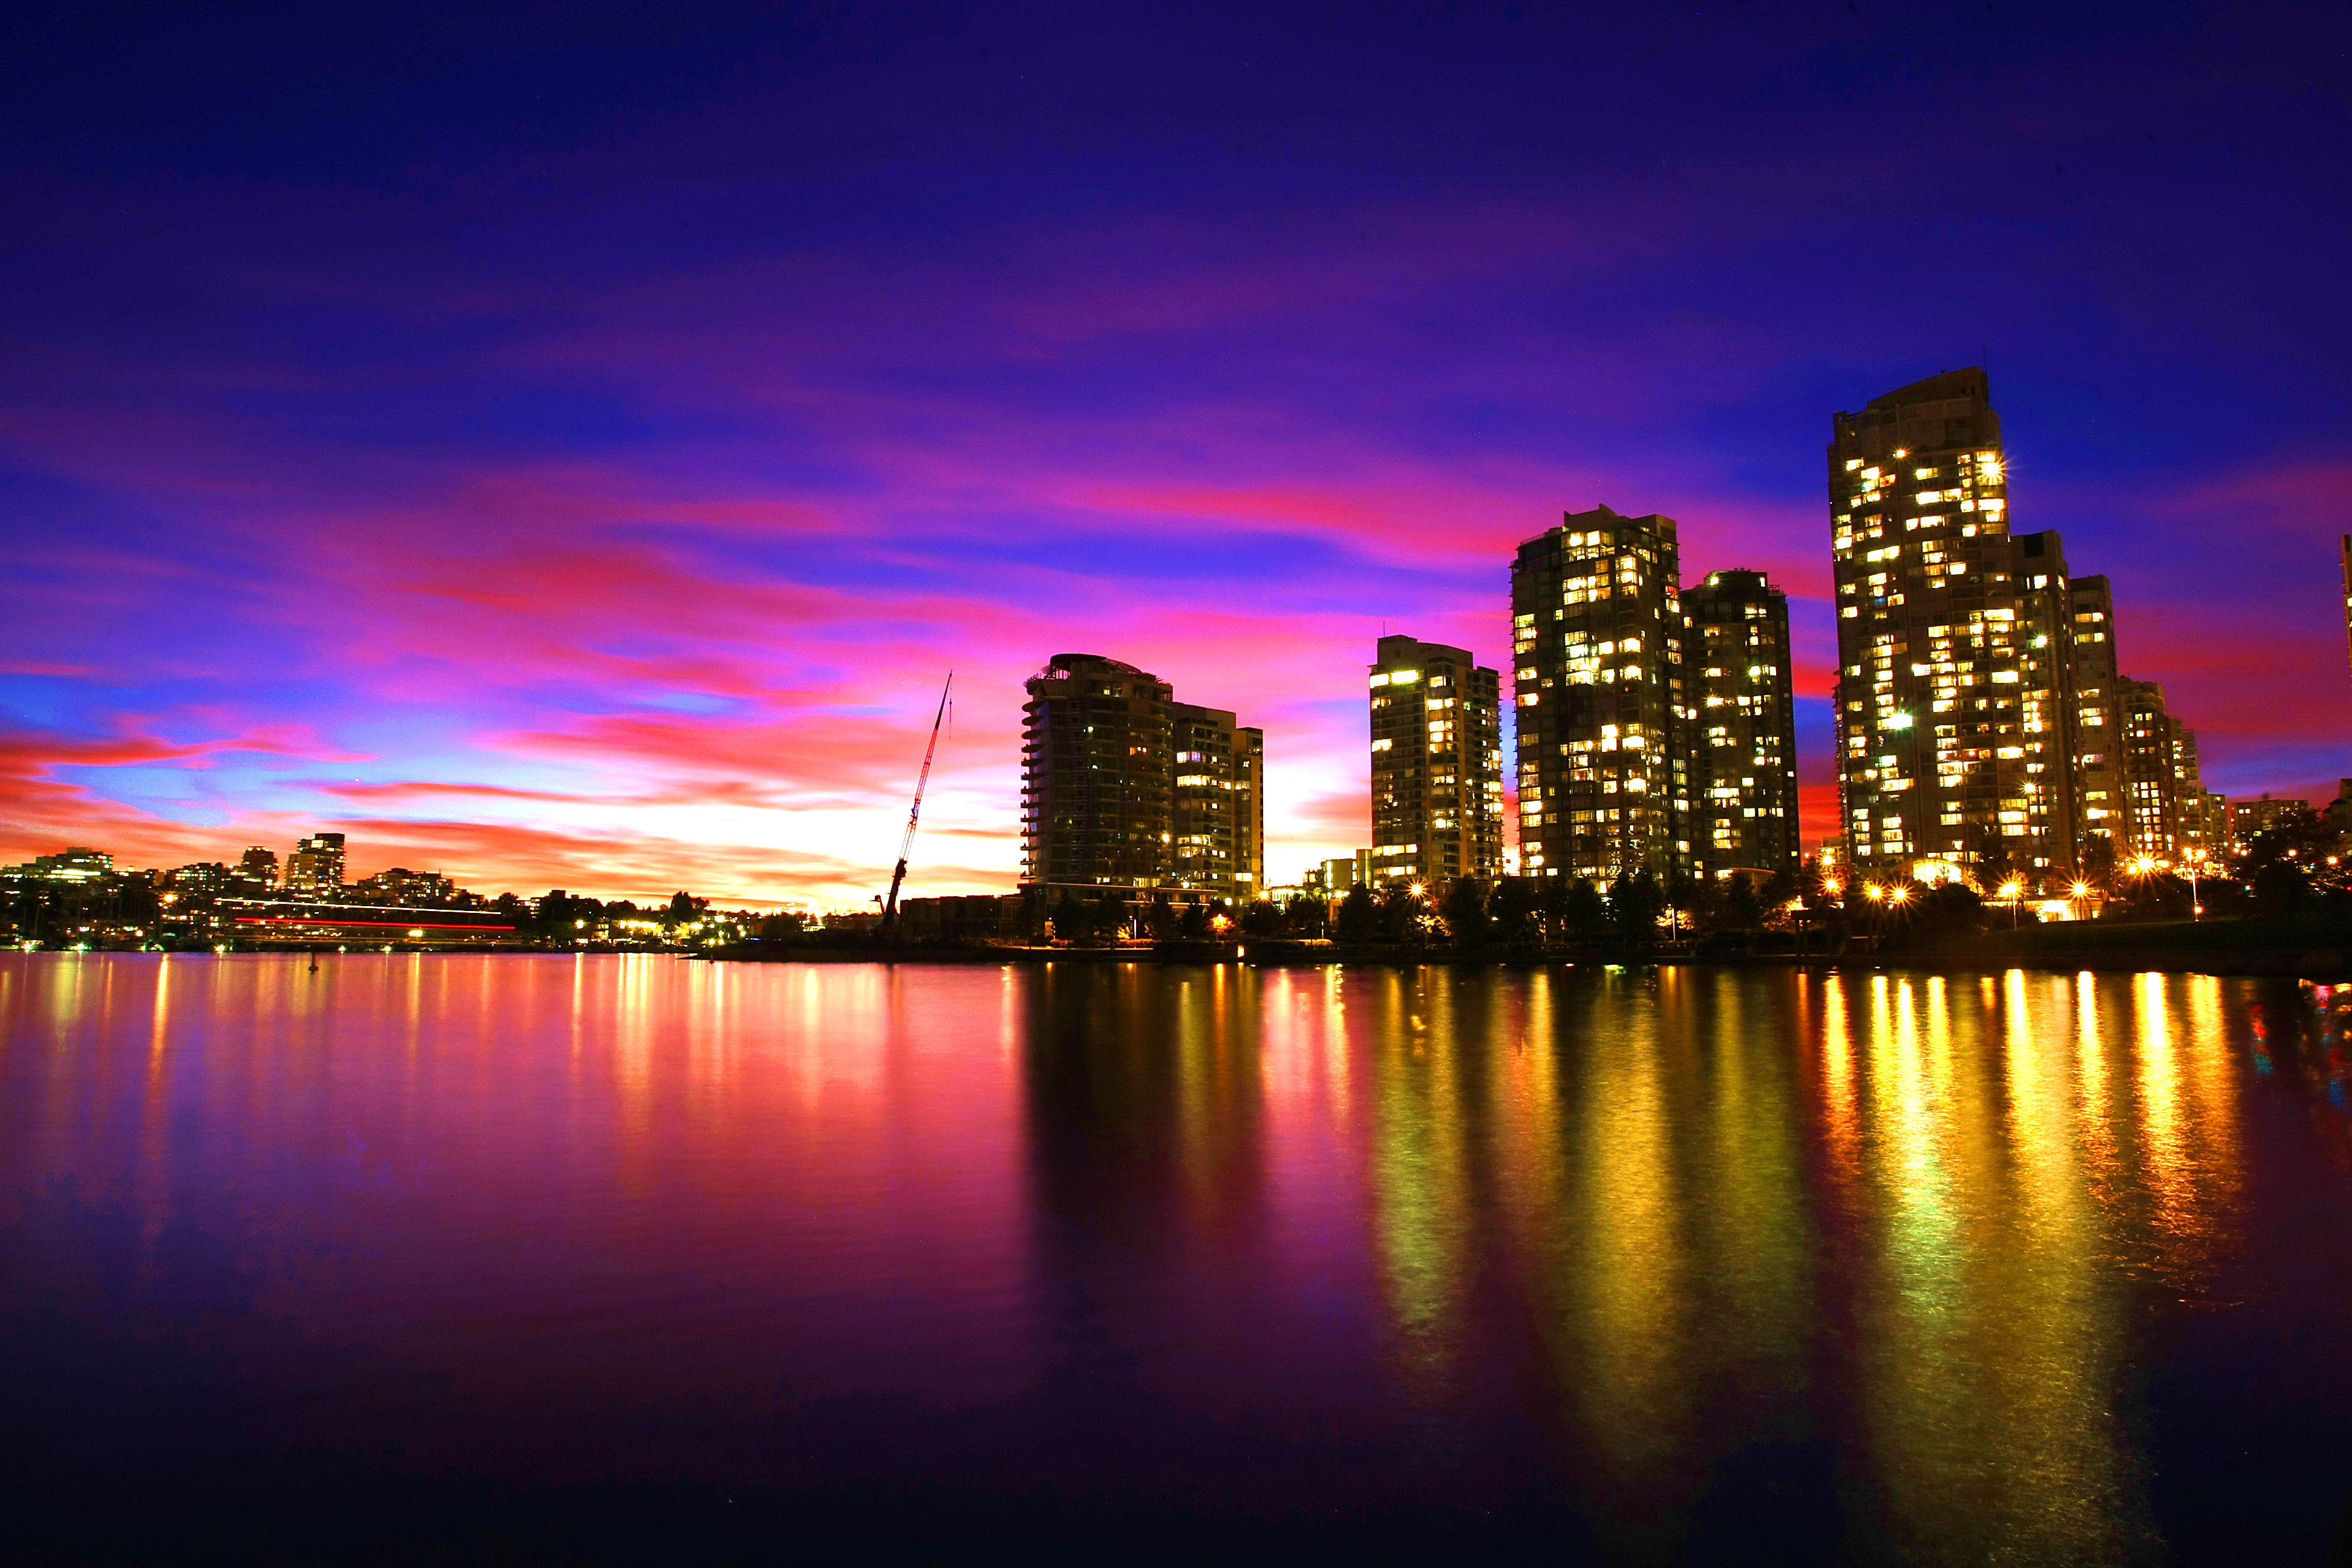 Free photo: City skyline at sunset - Buildings, Canada, City - Free